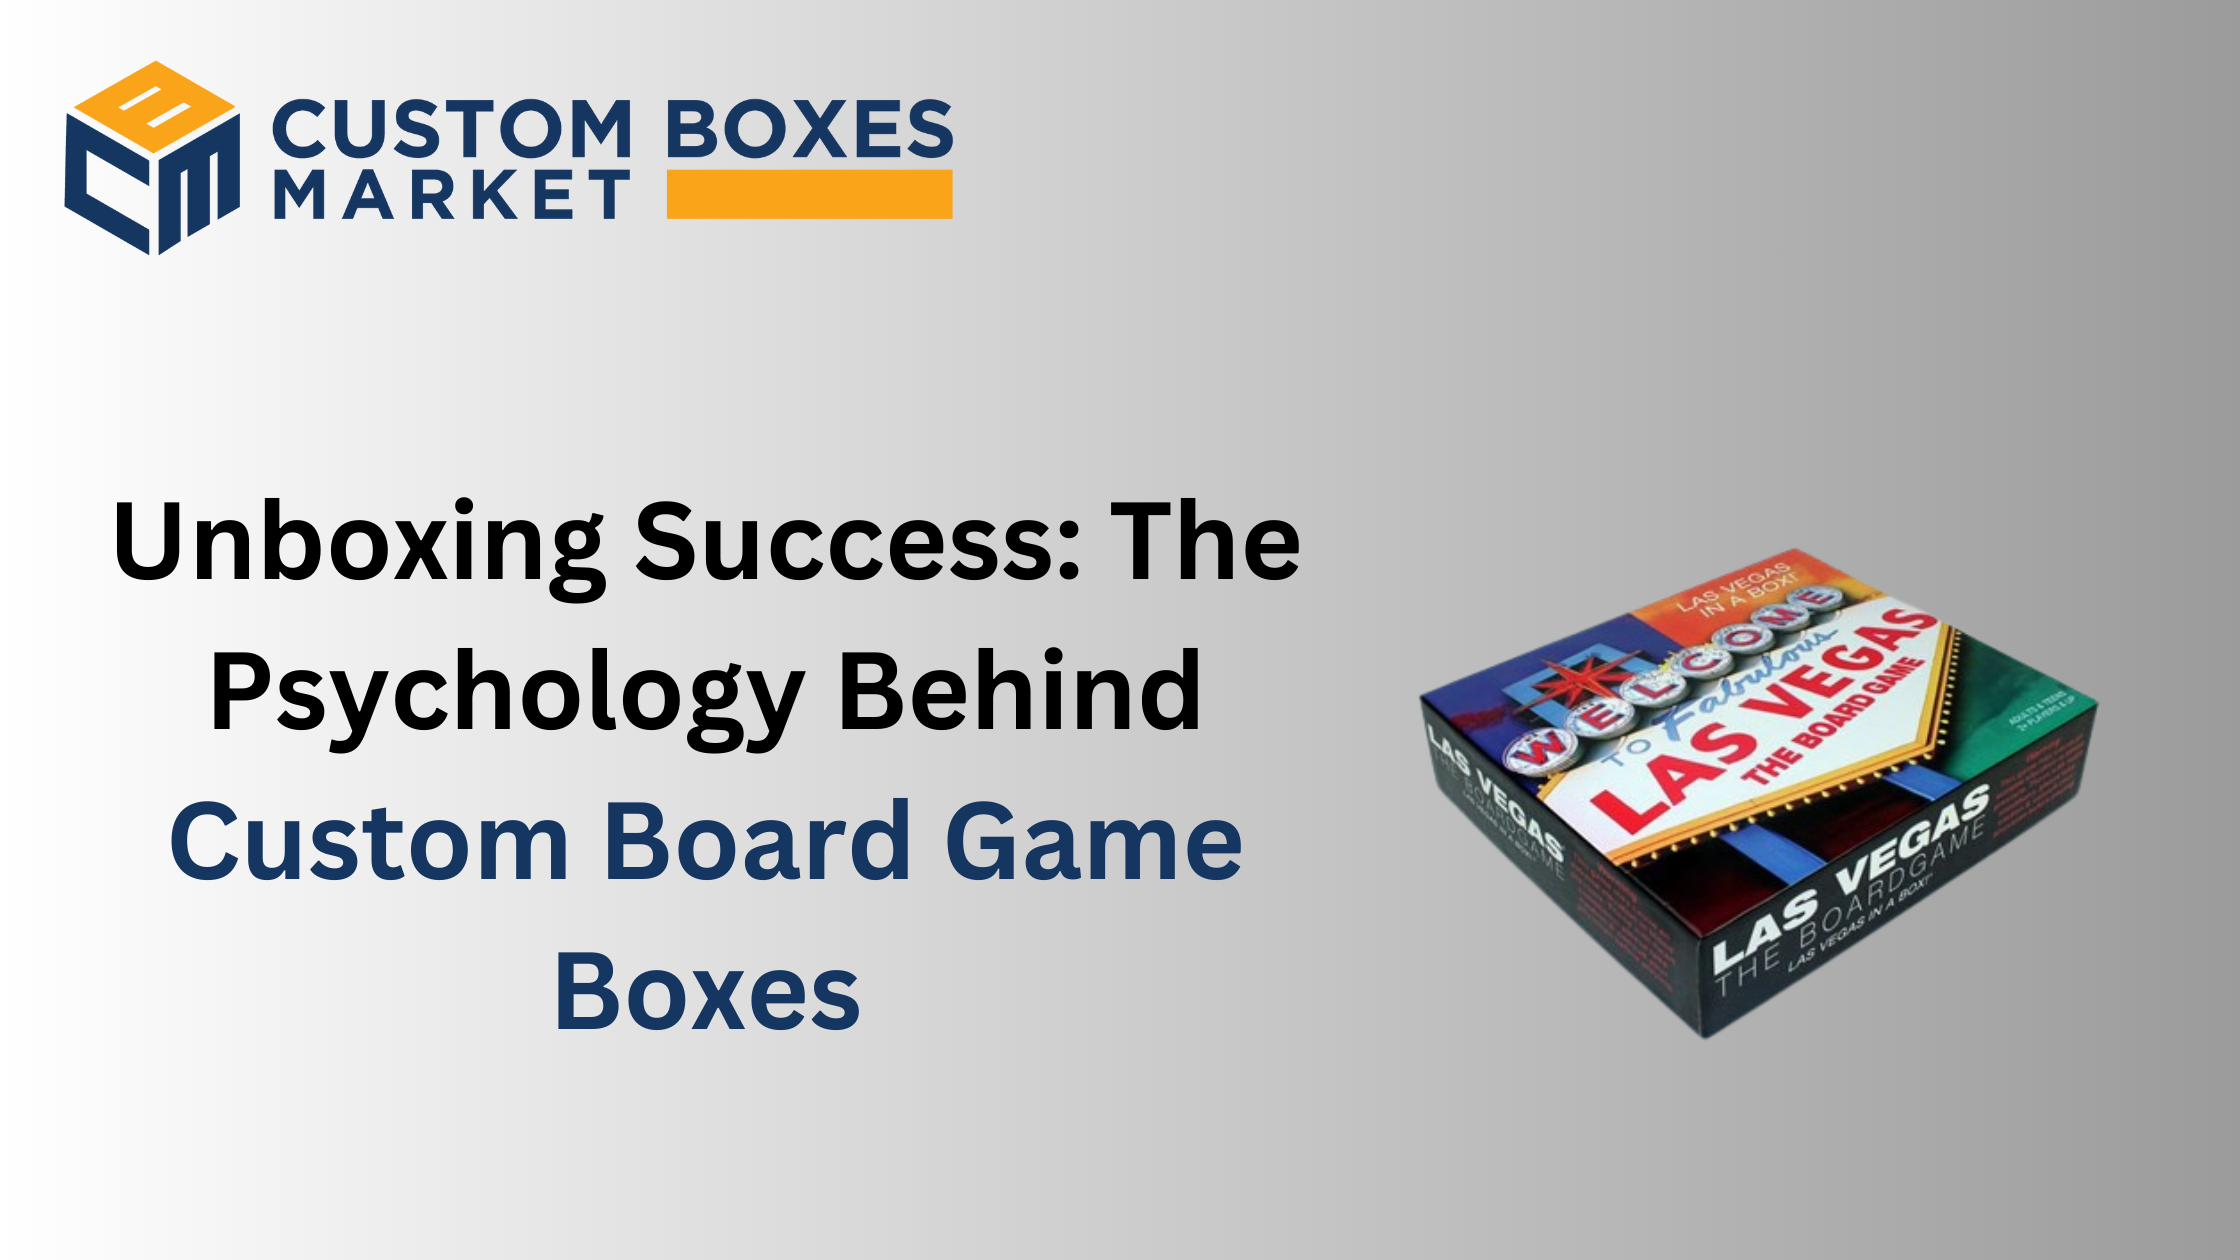 Unboxing Success: The Psychology Behind Custom Board Game Boxes